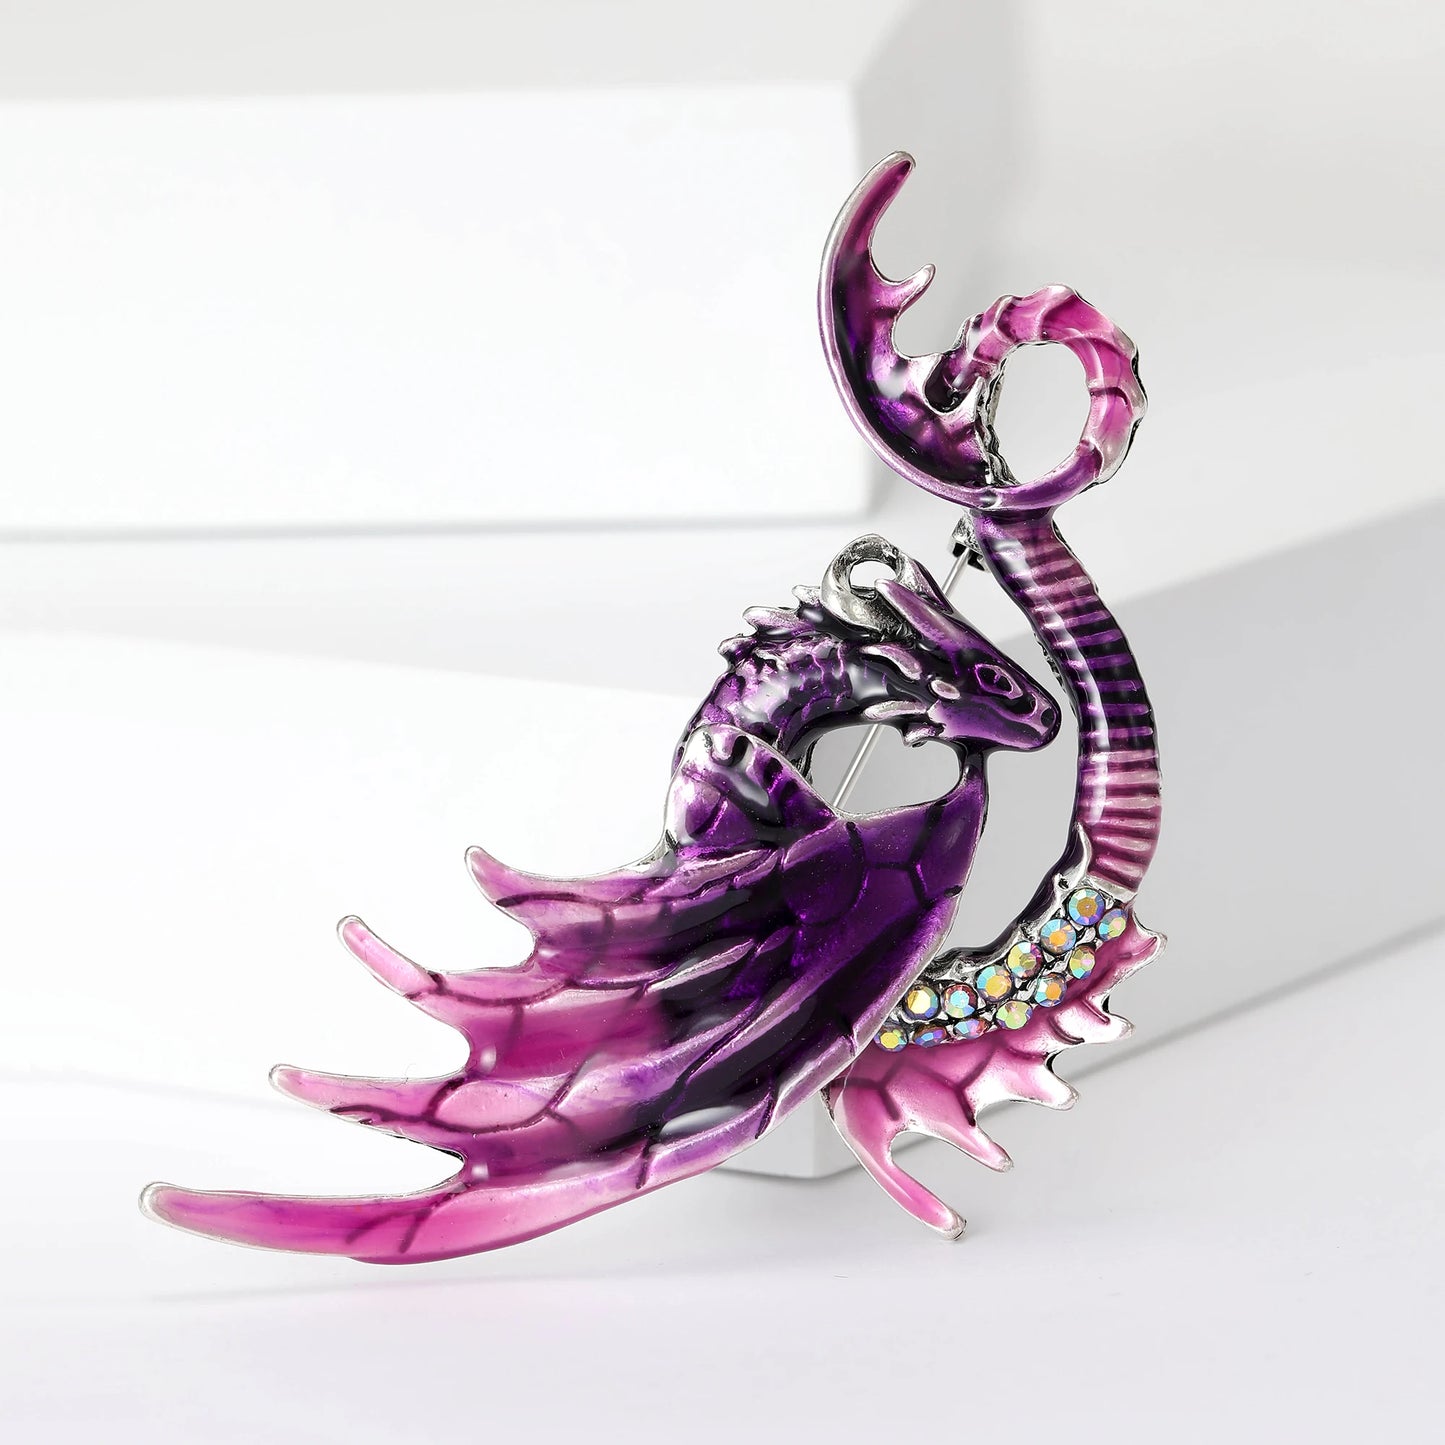 Enamel Dragon Brooches - Mythical Pieces Purple Coatyl